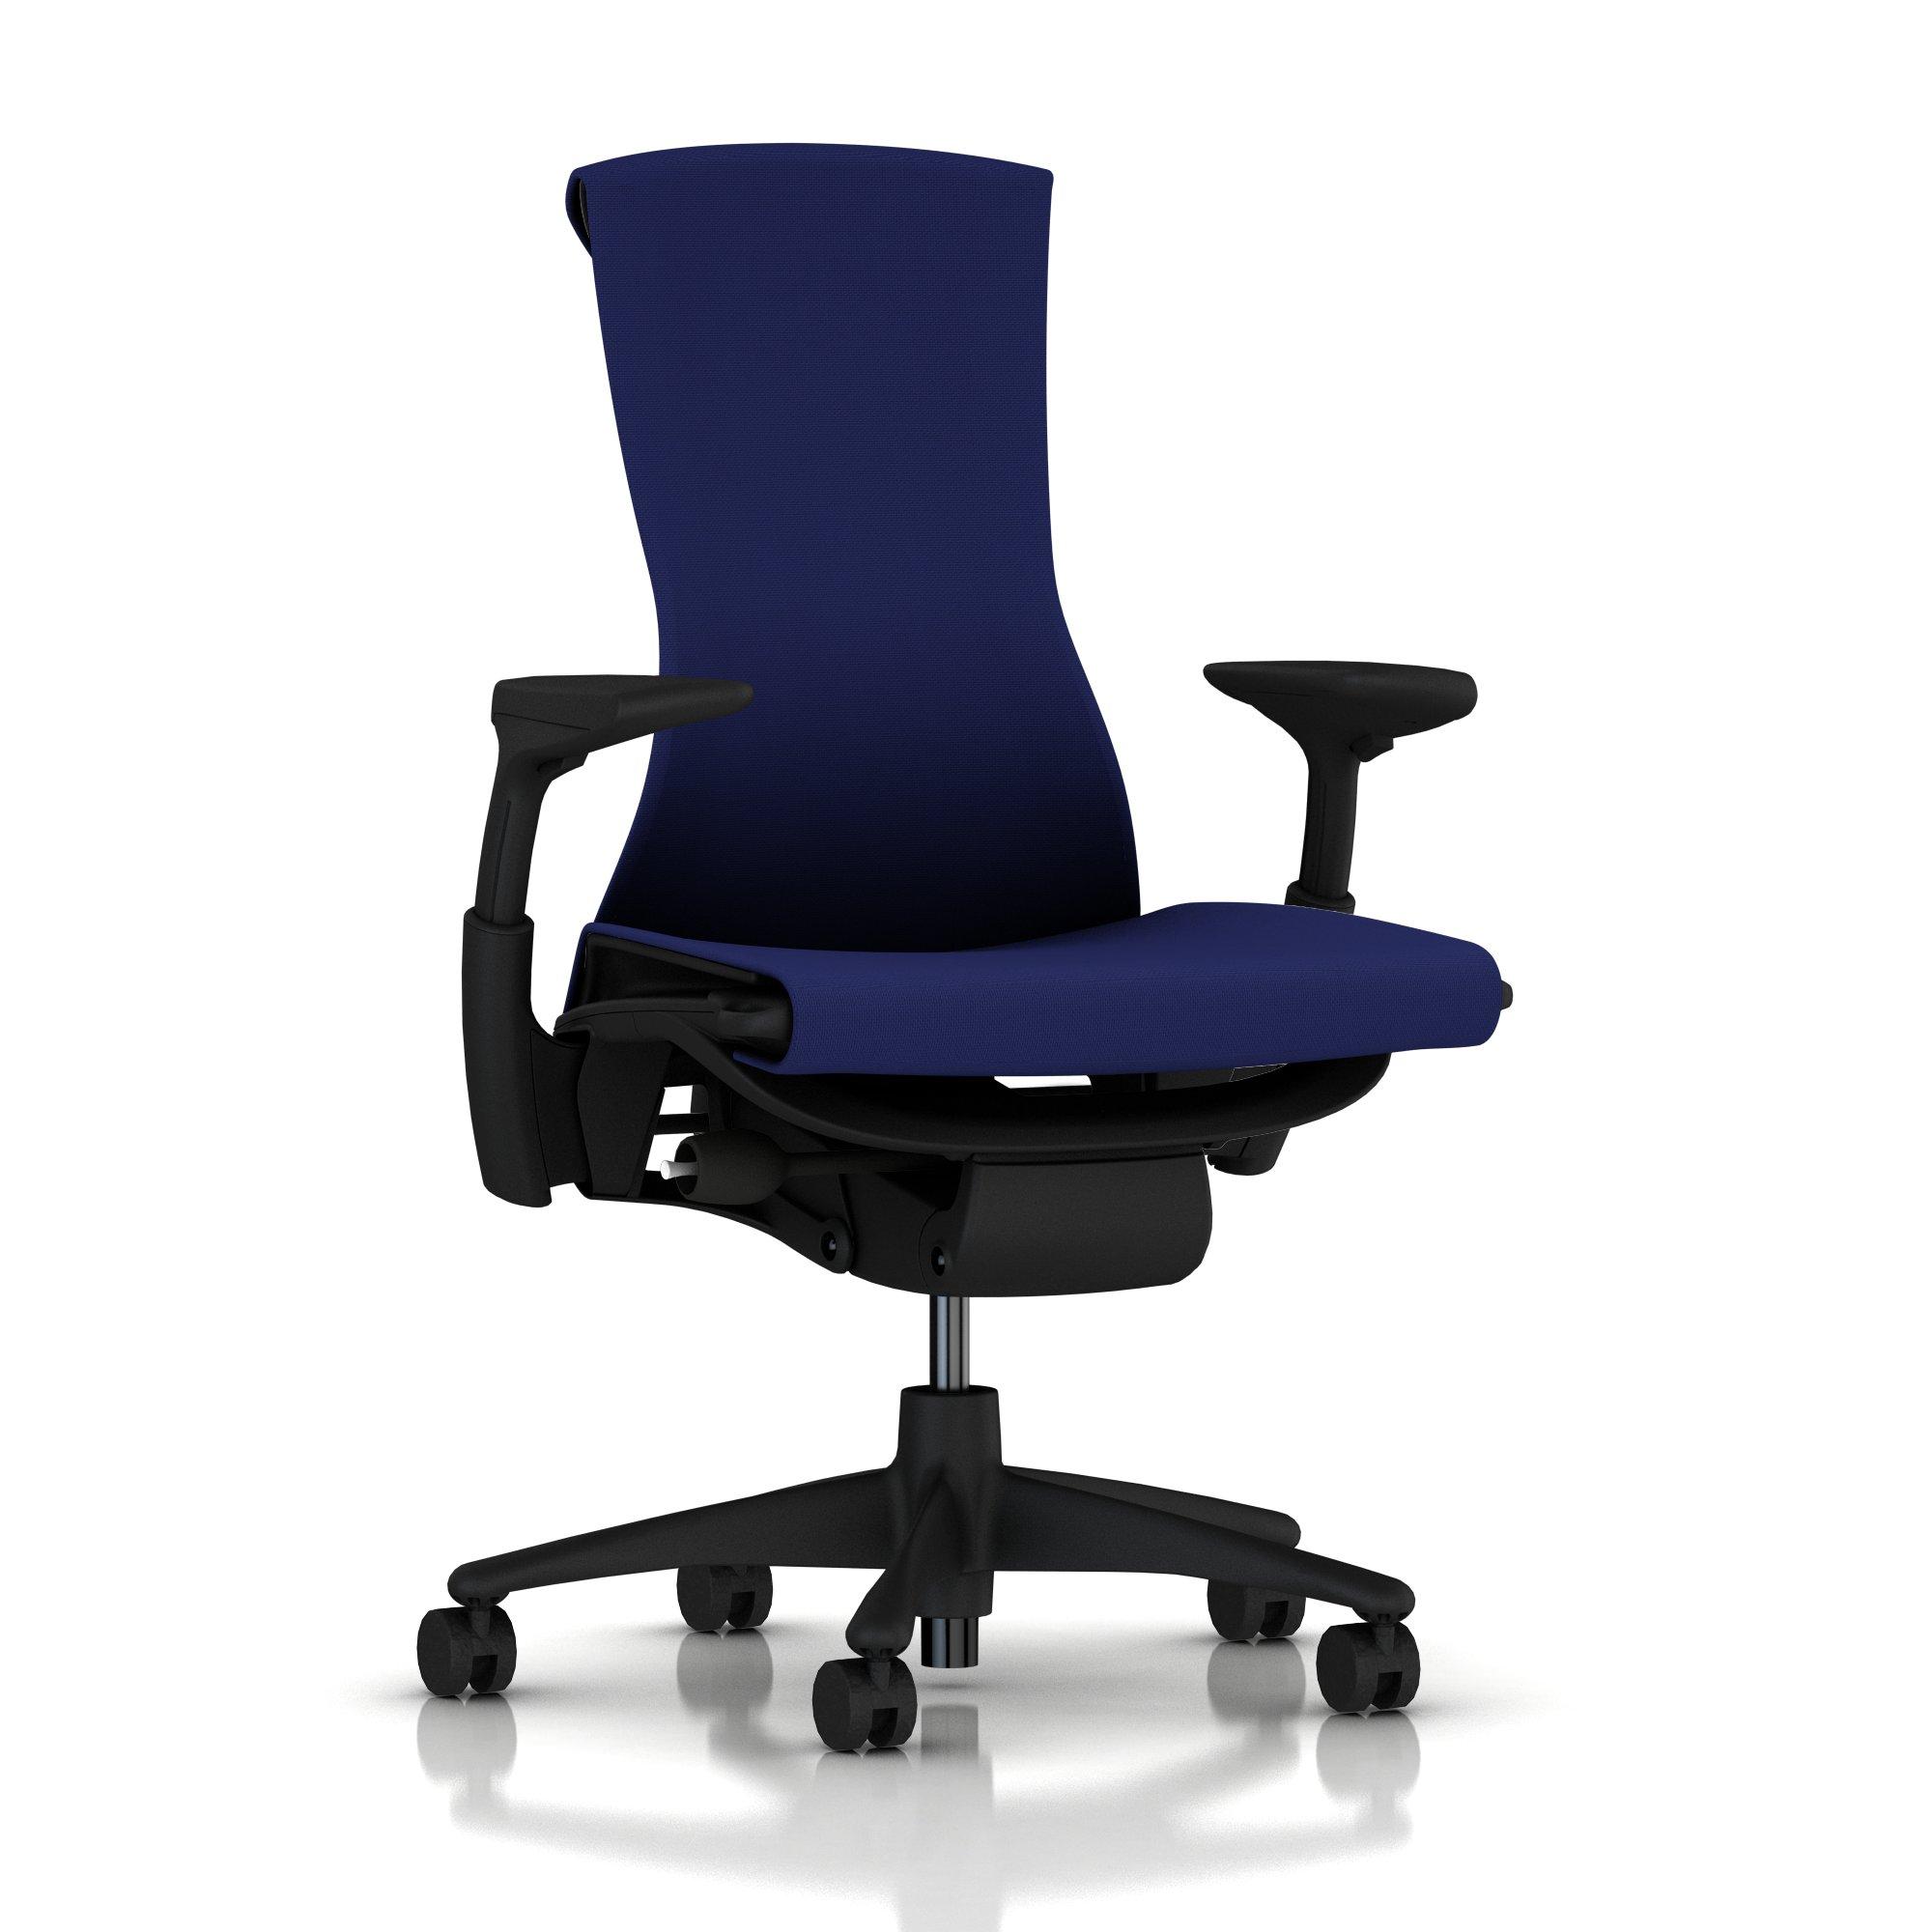 Embody Chair Twilight Blue Rhythm with Graphite Frame by Herman Miller